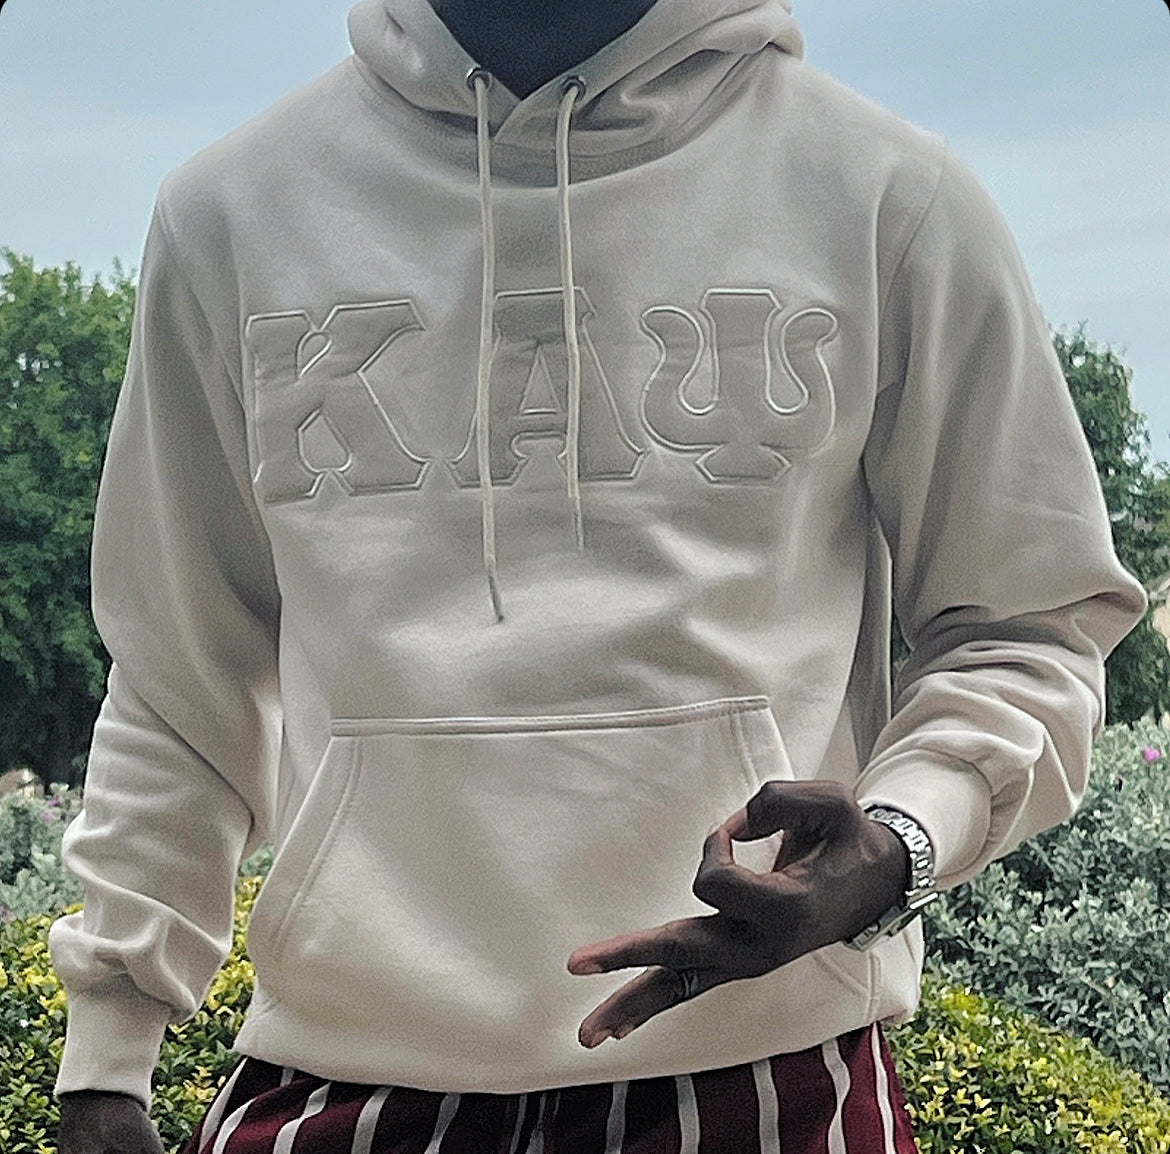 Exclusive Kappa Alpha Psi Embroidery Lettered Hoodie. This is the perfect long-sleeved hoodie to wear while showing off your Kappa Alpha Psi fraternity lettering. A comfortable cotton tee with a twill Greek letters embroidery across the chest give you the perfect fit. This hoodie is also a perfect gift or your favorite Kappa Man.